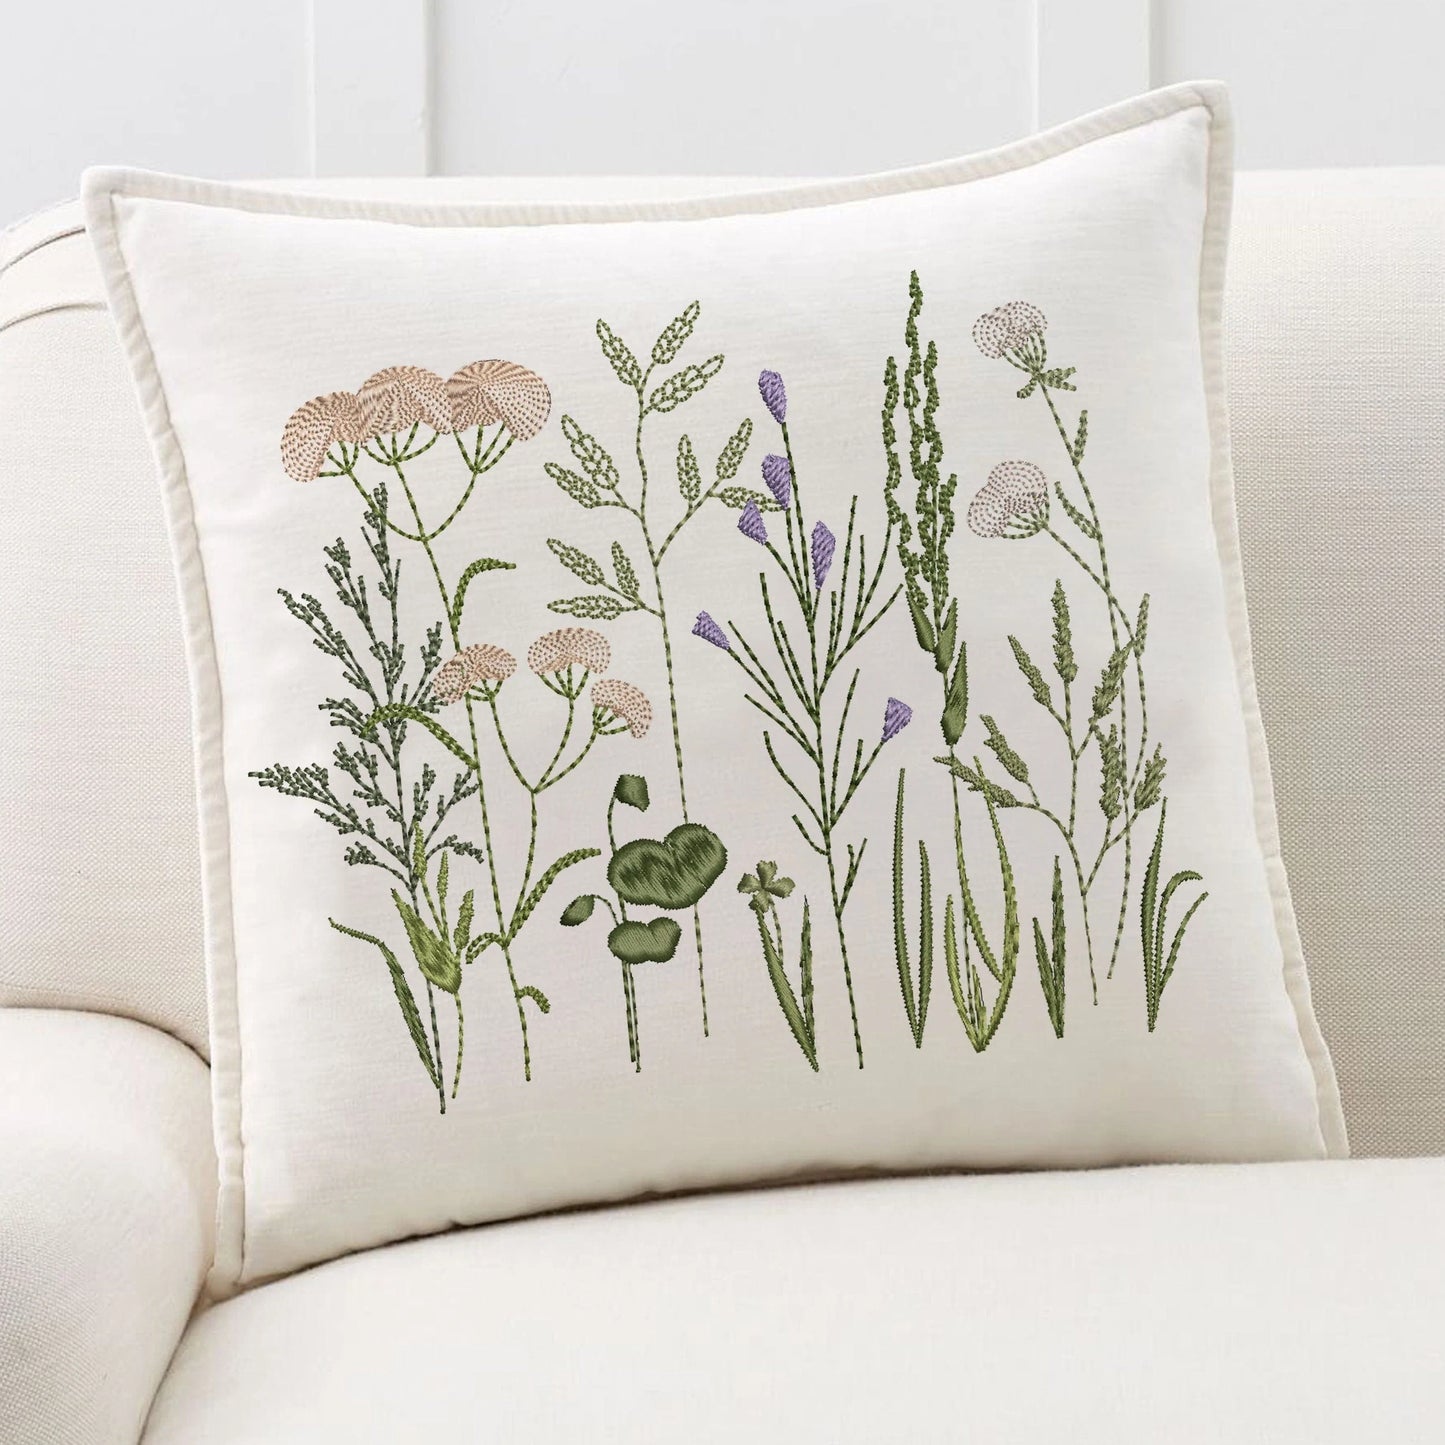 Meadow wildflower machine embroidery design set on pillow